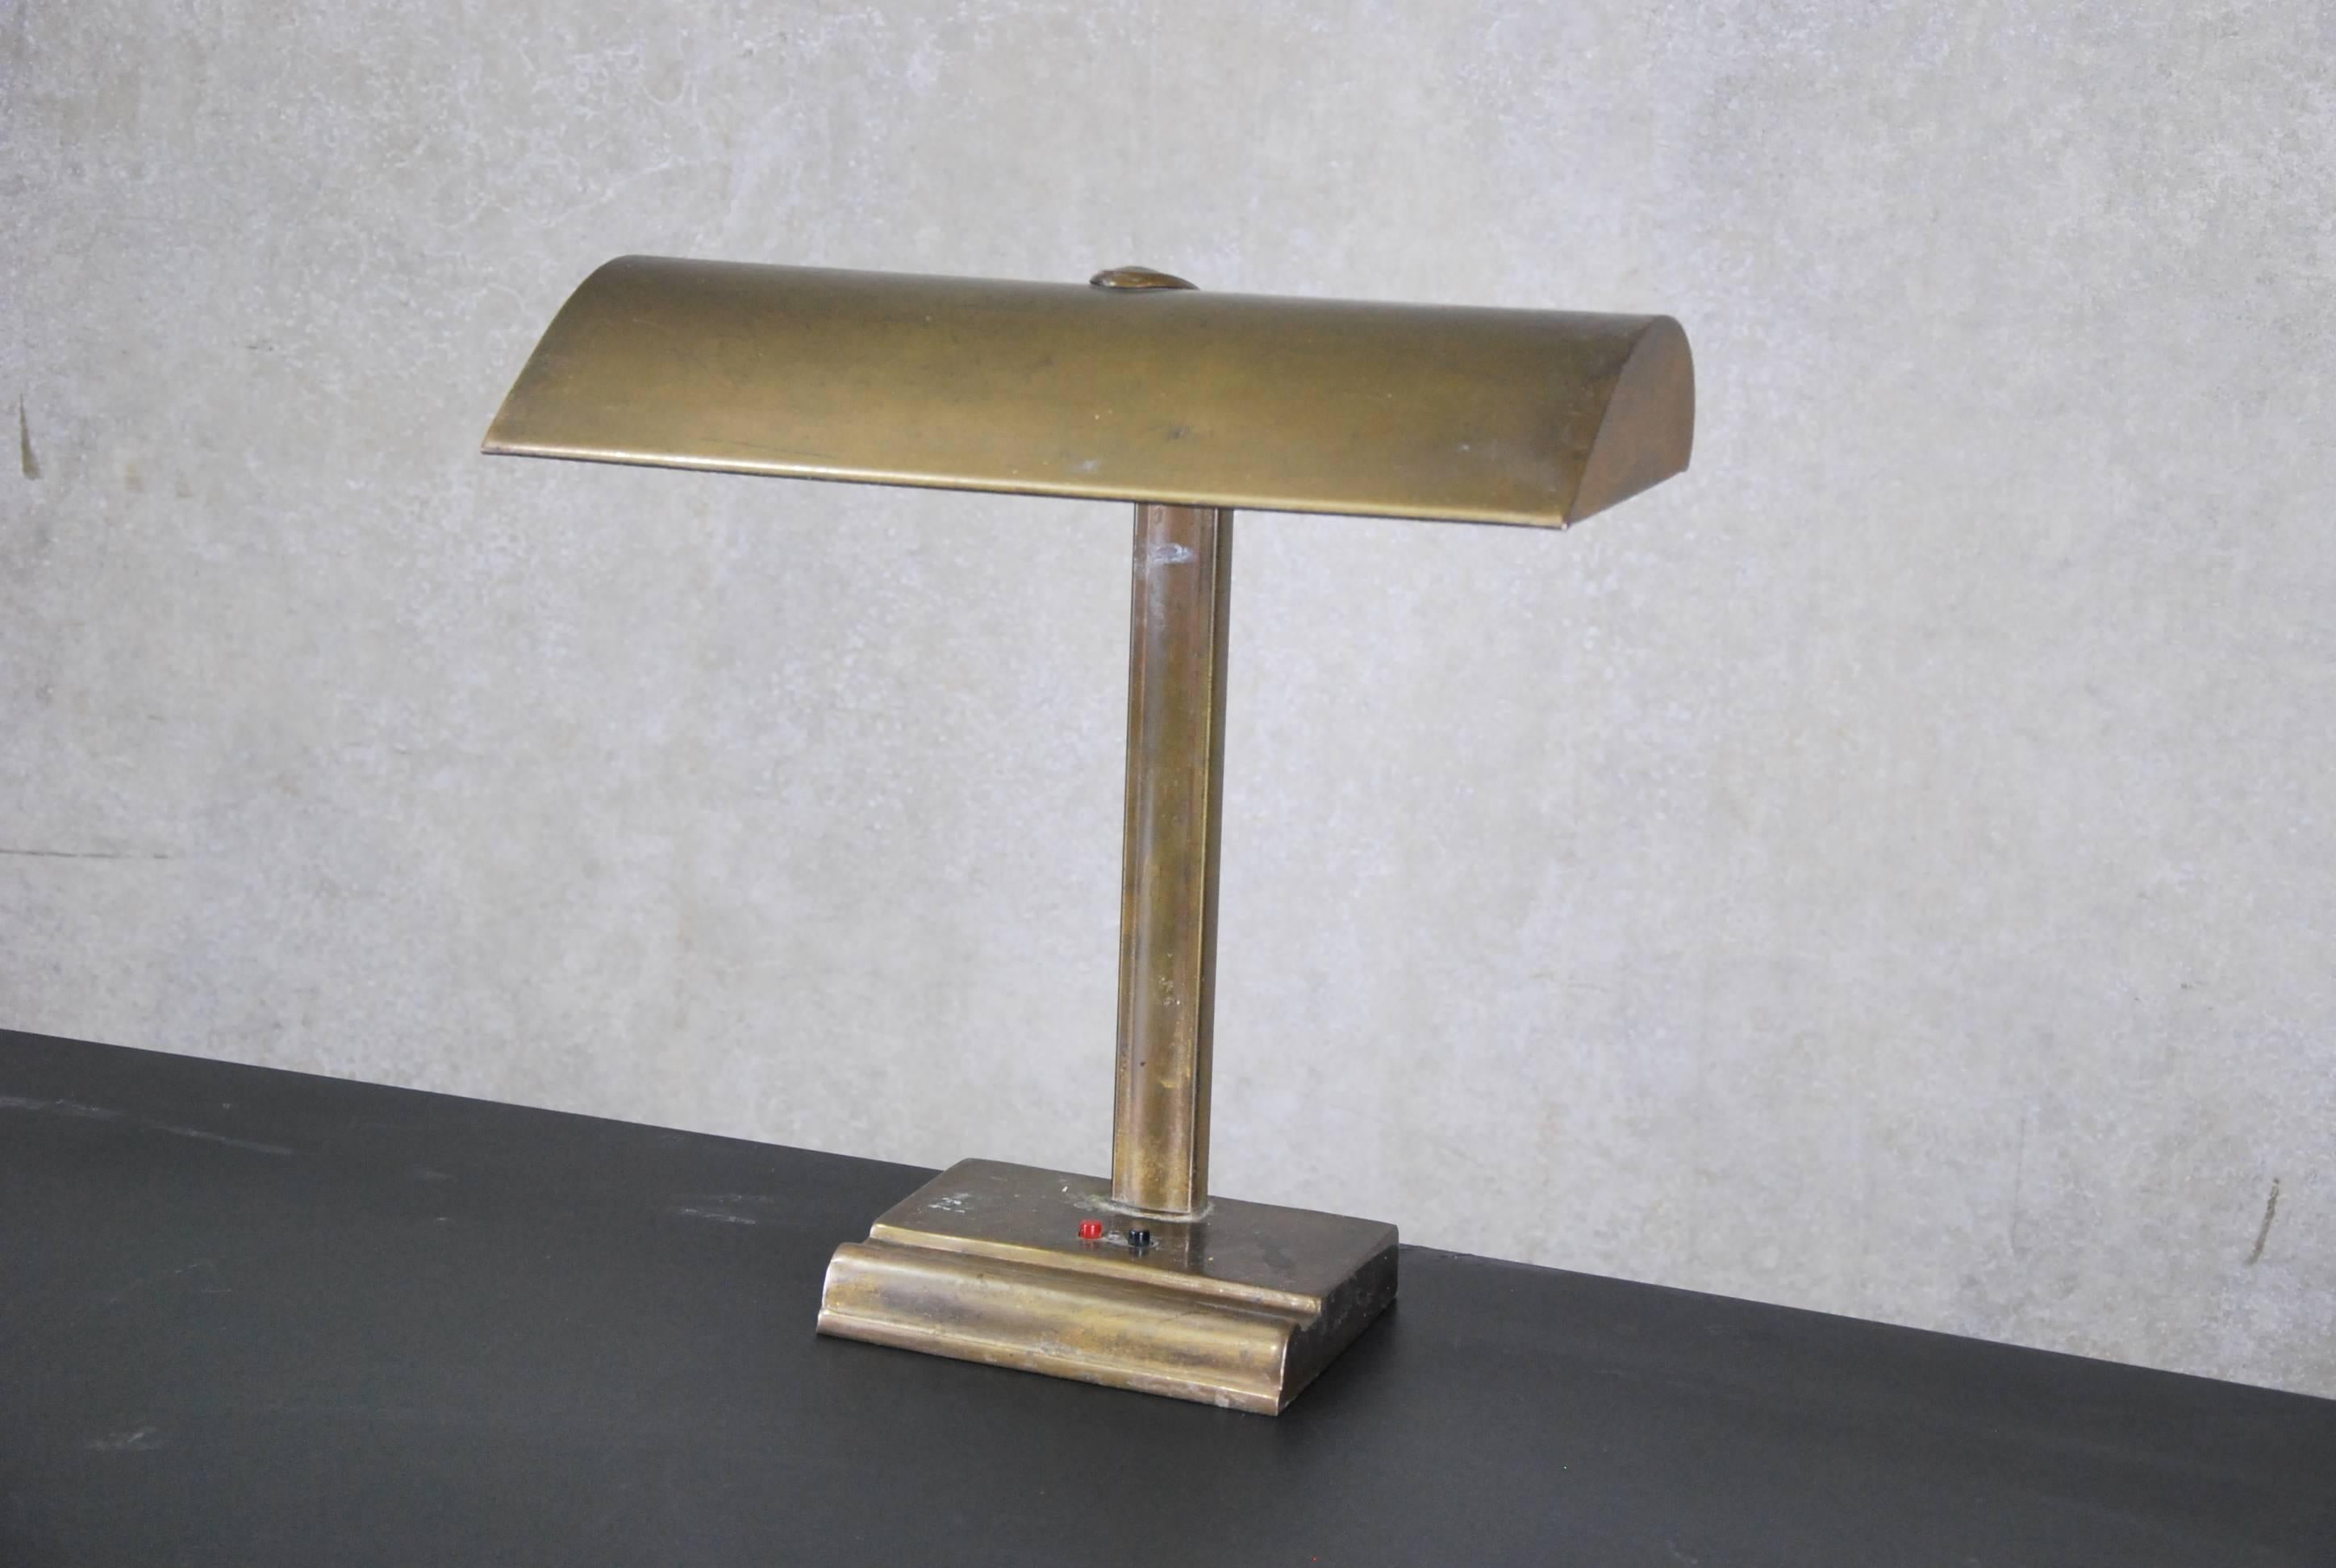 Beautiful simple functioning desk lamp in old brass finish over metal.